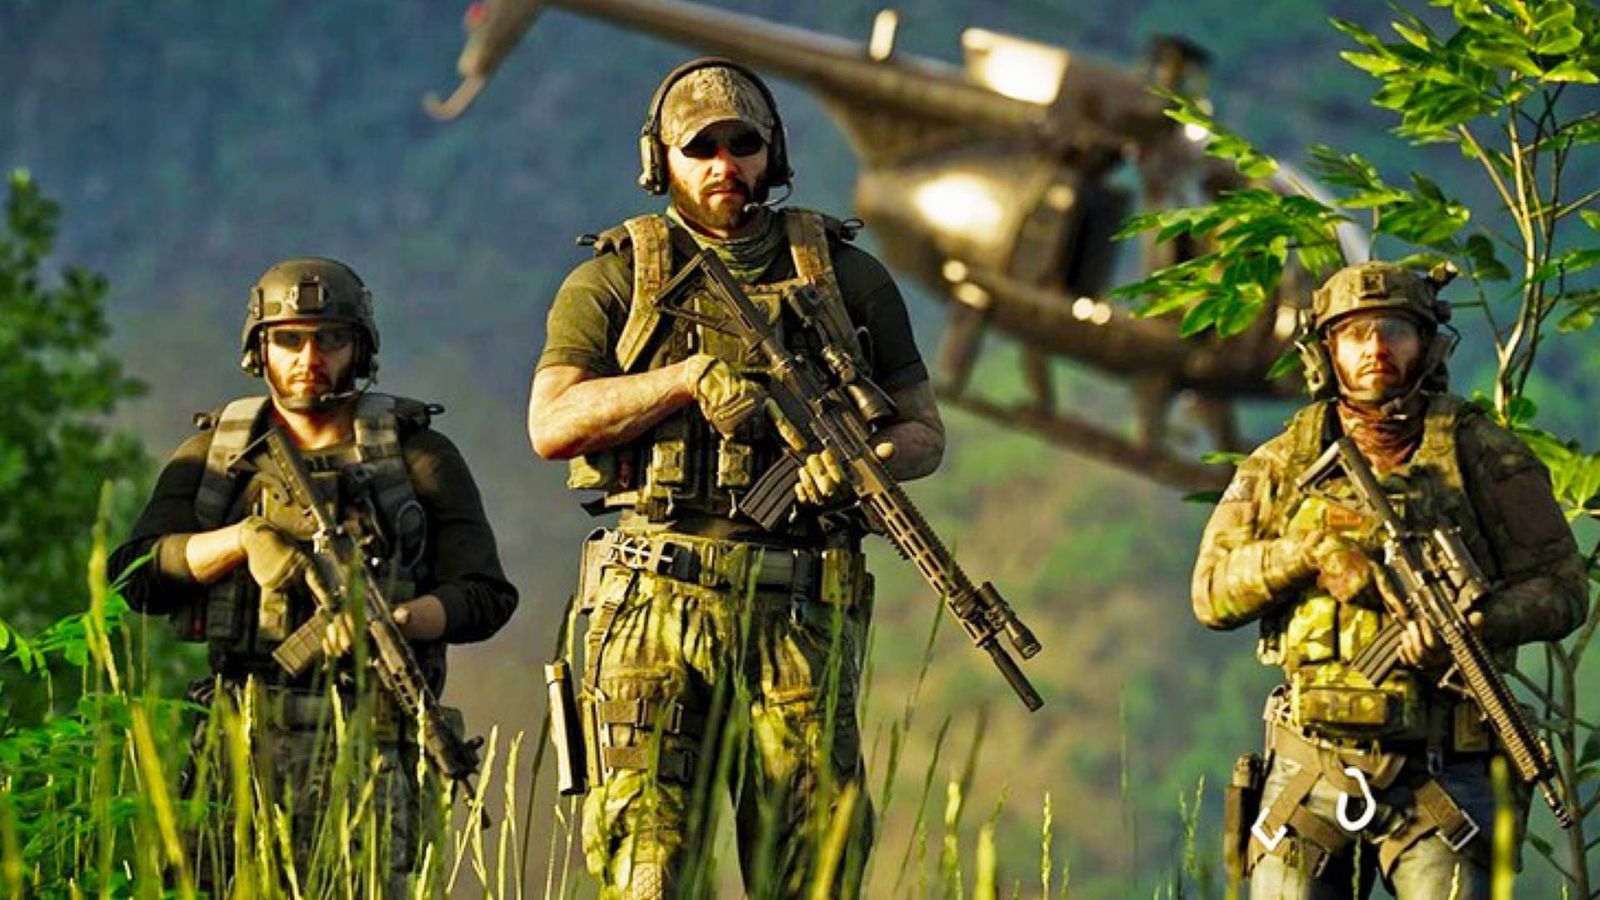 Three soldiers in camo gear carrying rifles with a helicopter in the background from Gray Zone Warfare.